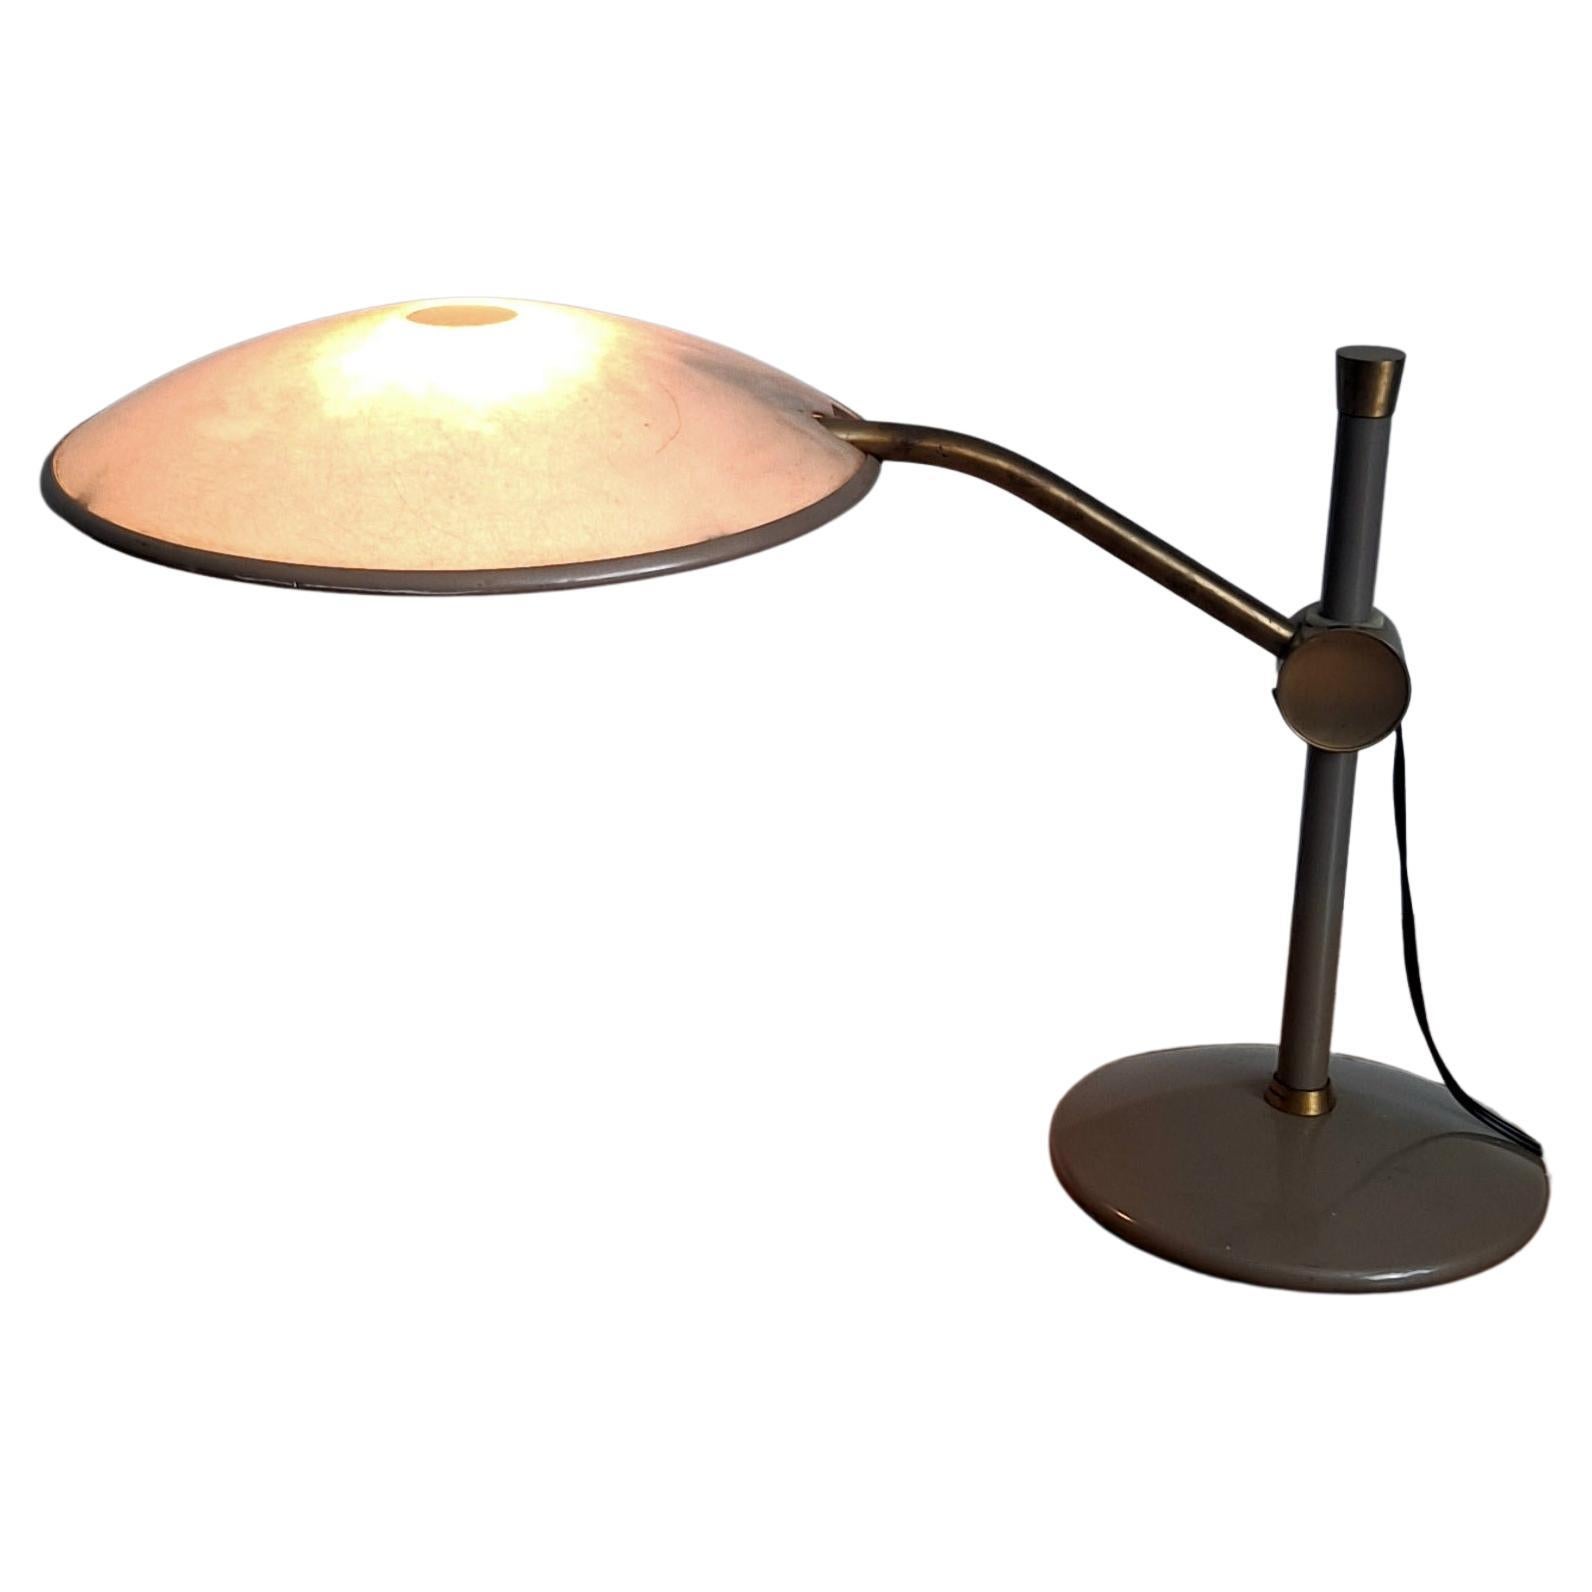 1960's Dazor  Model 2008  Made in U.S.A. The Lamp shade  is adjustable, rotate to the right and left and adjust up and down. 